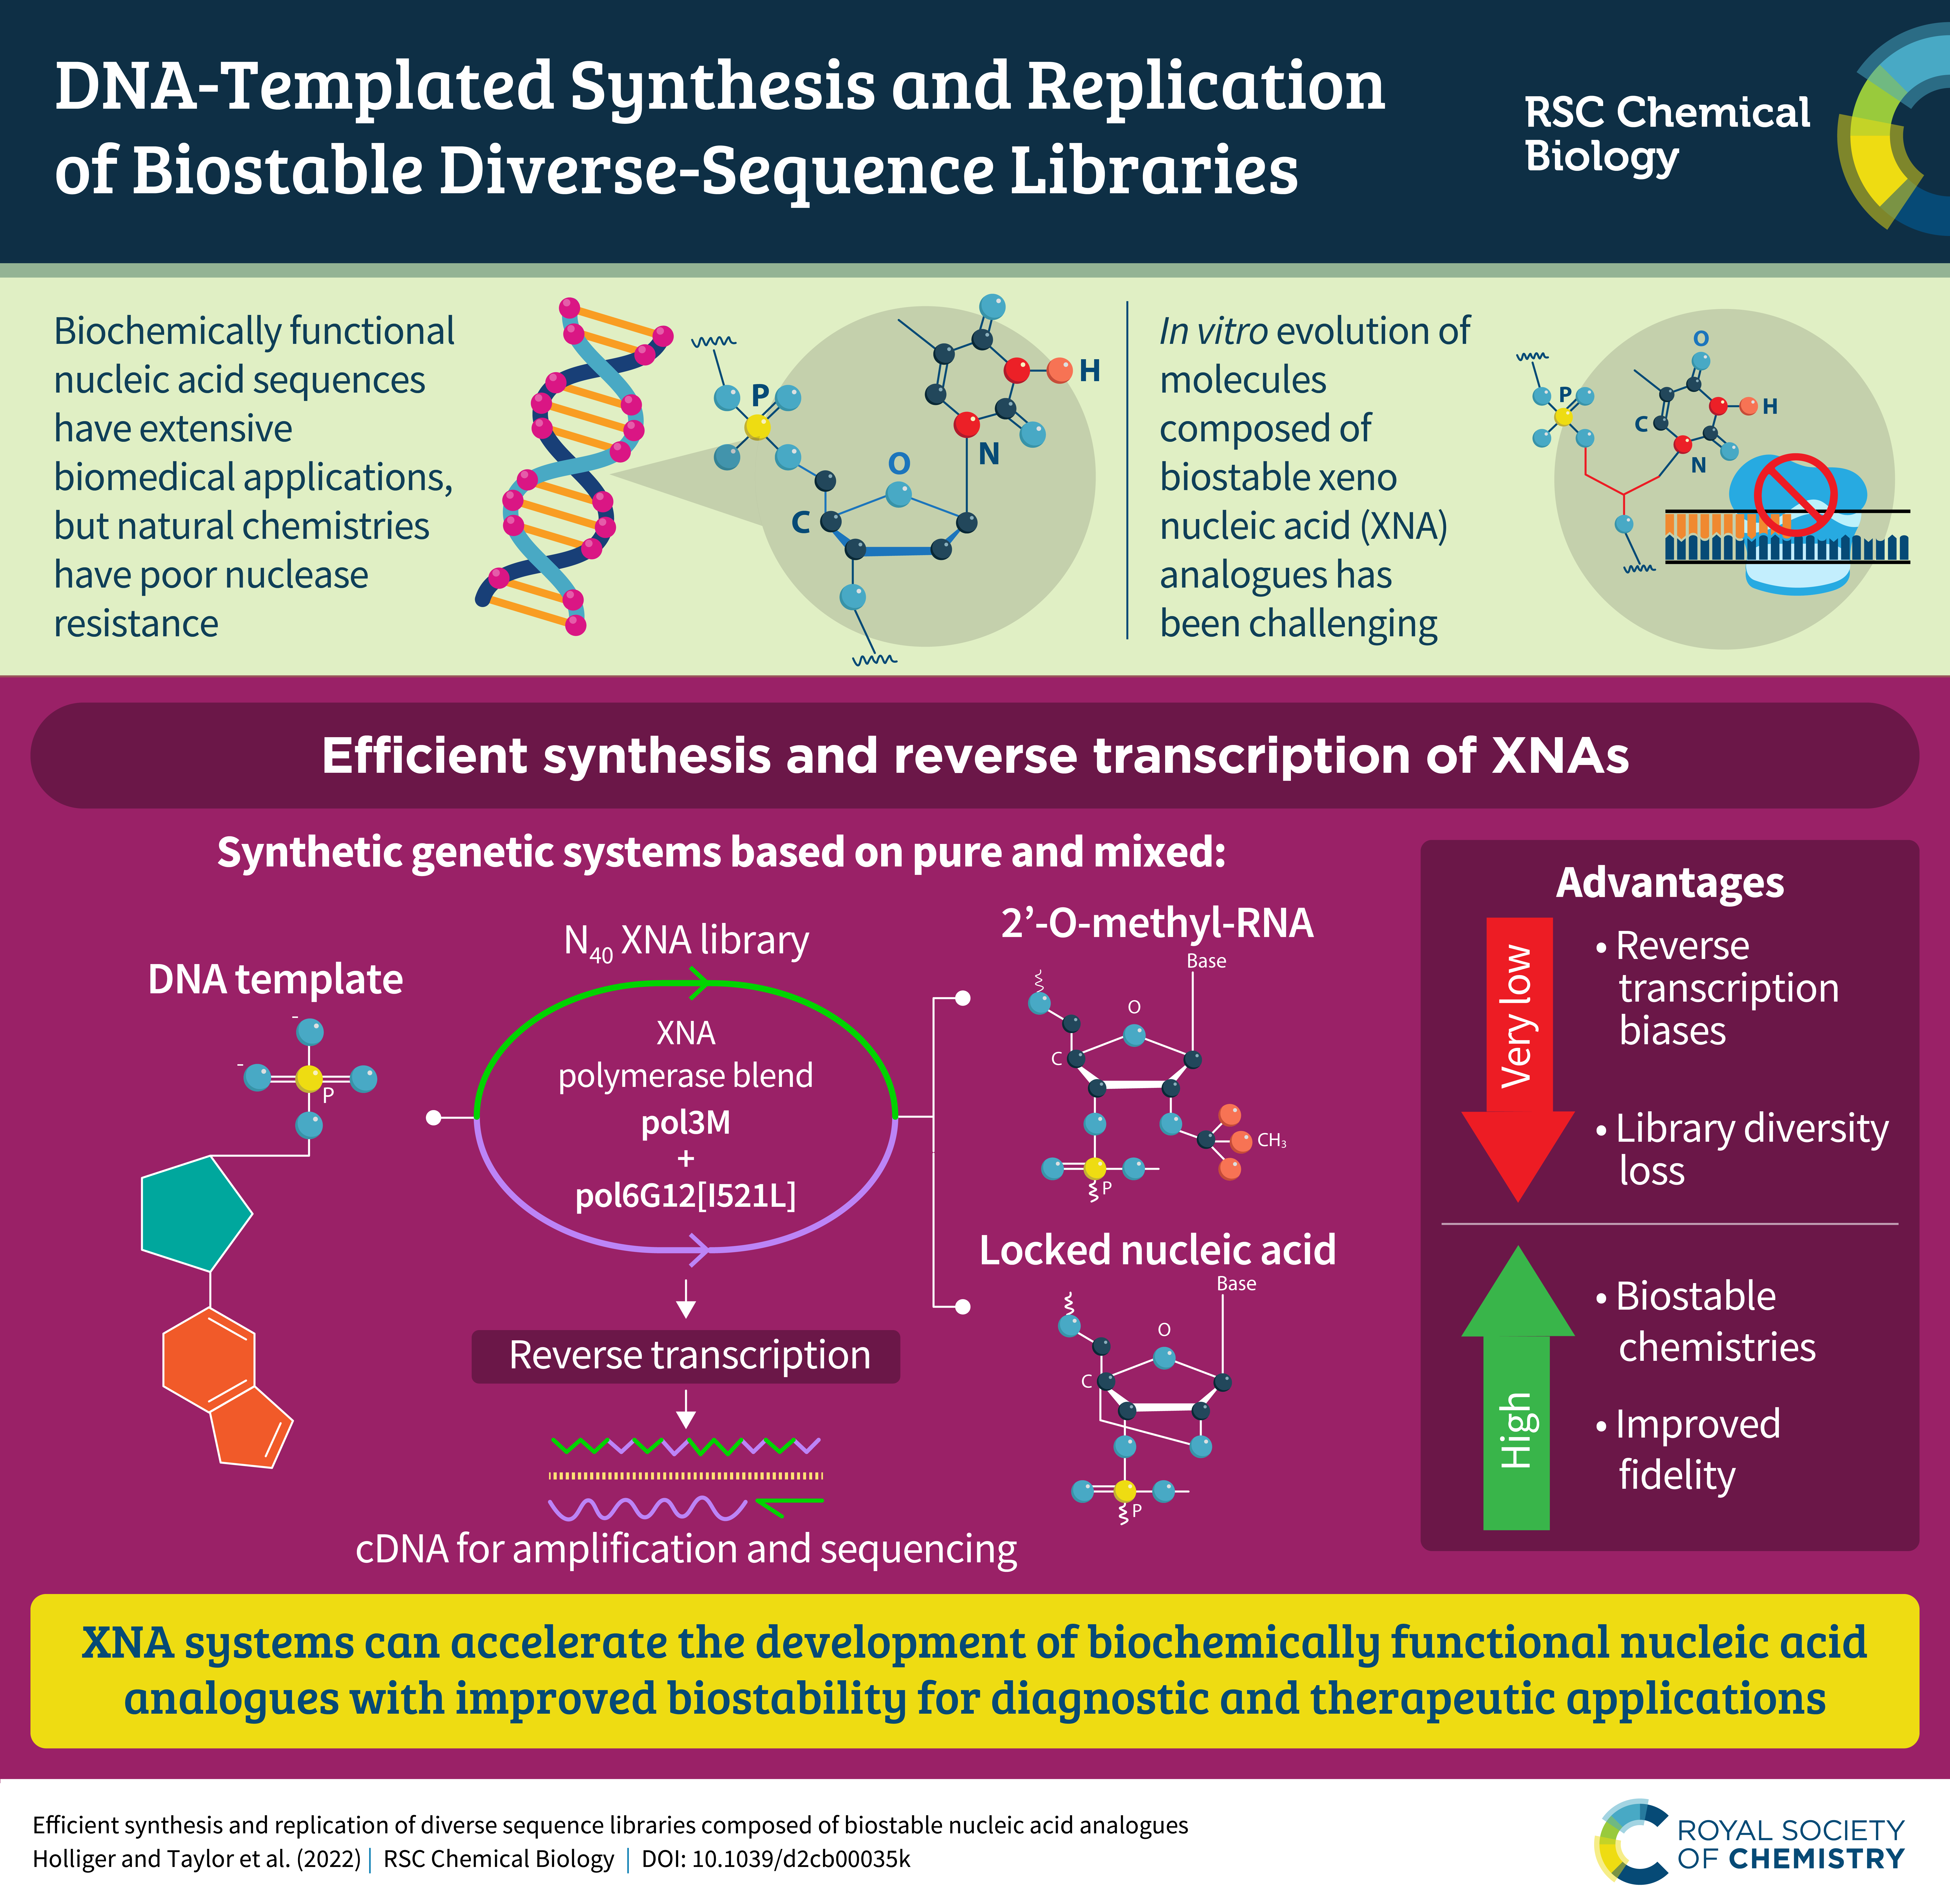 infographic of efficient synthesis and replication of diverse sequence libraries composed of biostable nucleic acid analogues